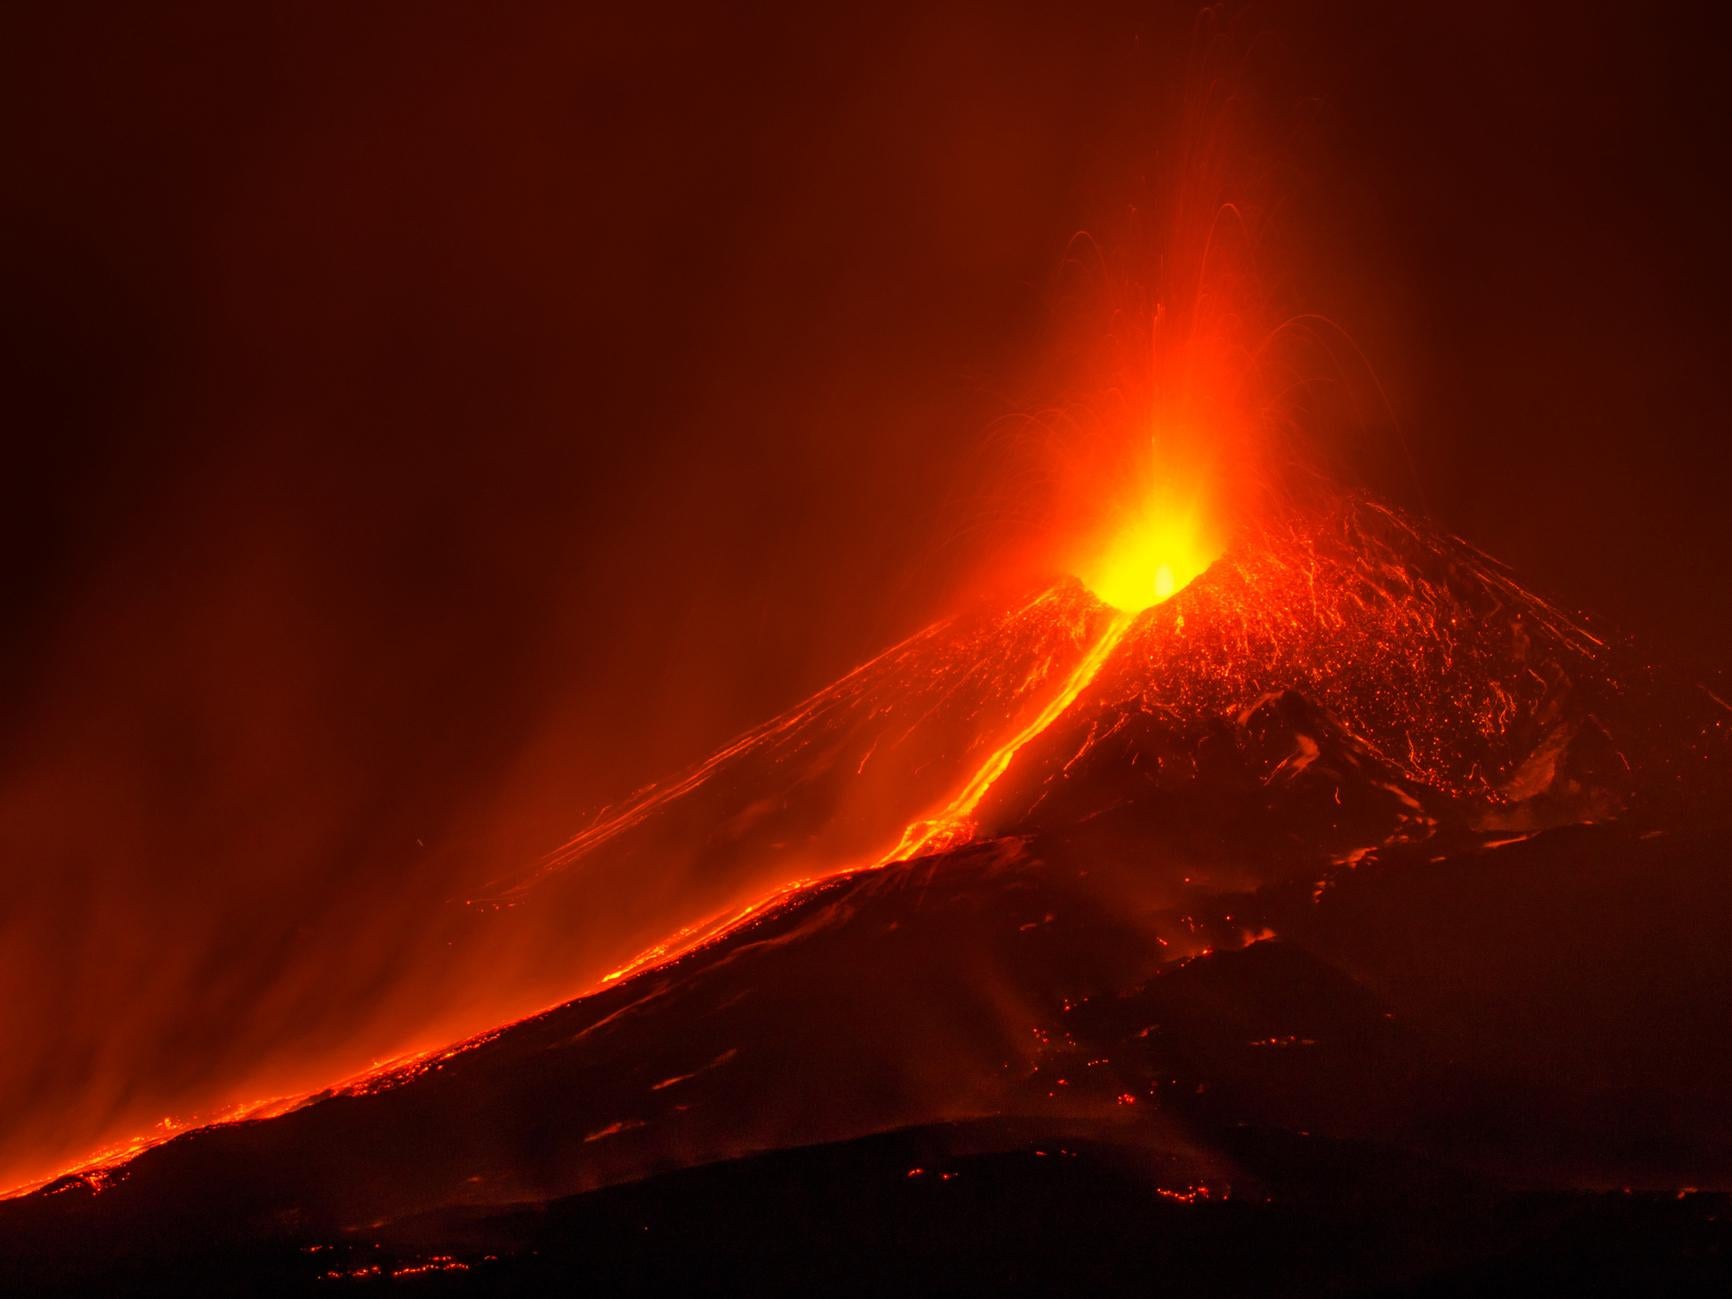 Mount Etna is in an almost constant state of activity, with eruptions occurring particularly regularly in recent decades